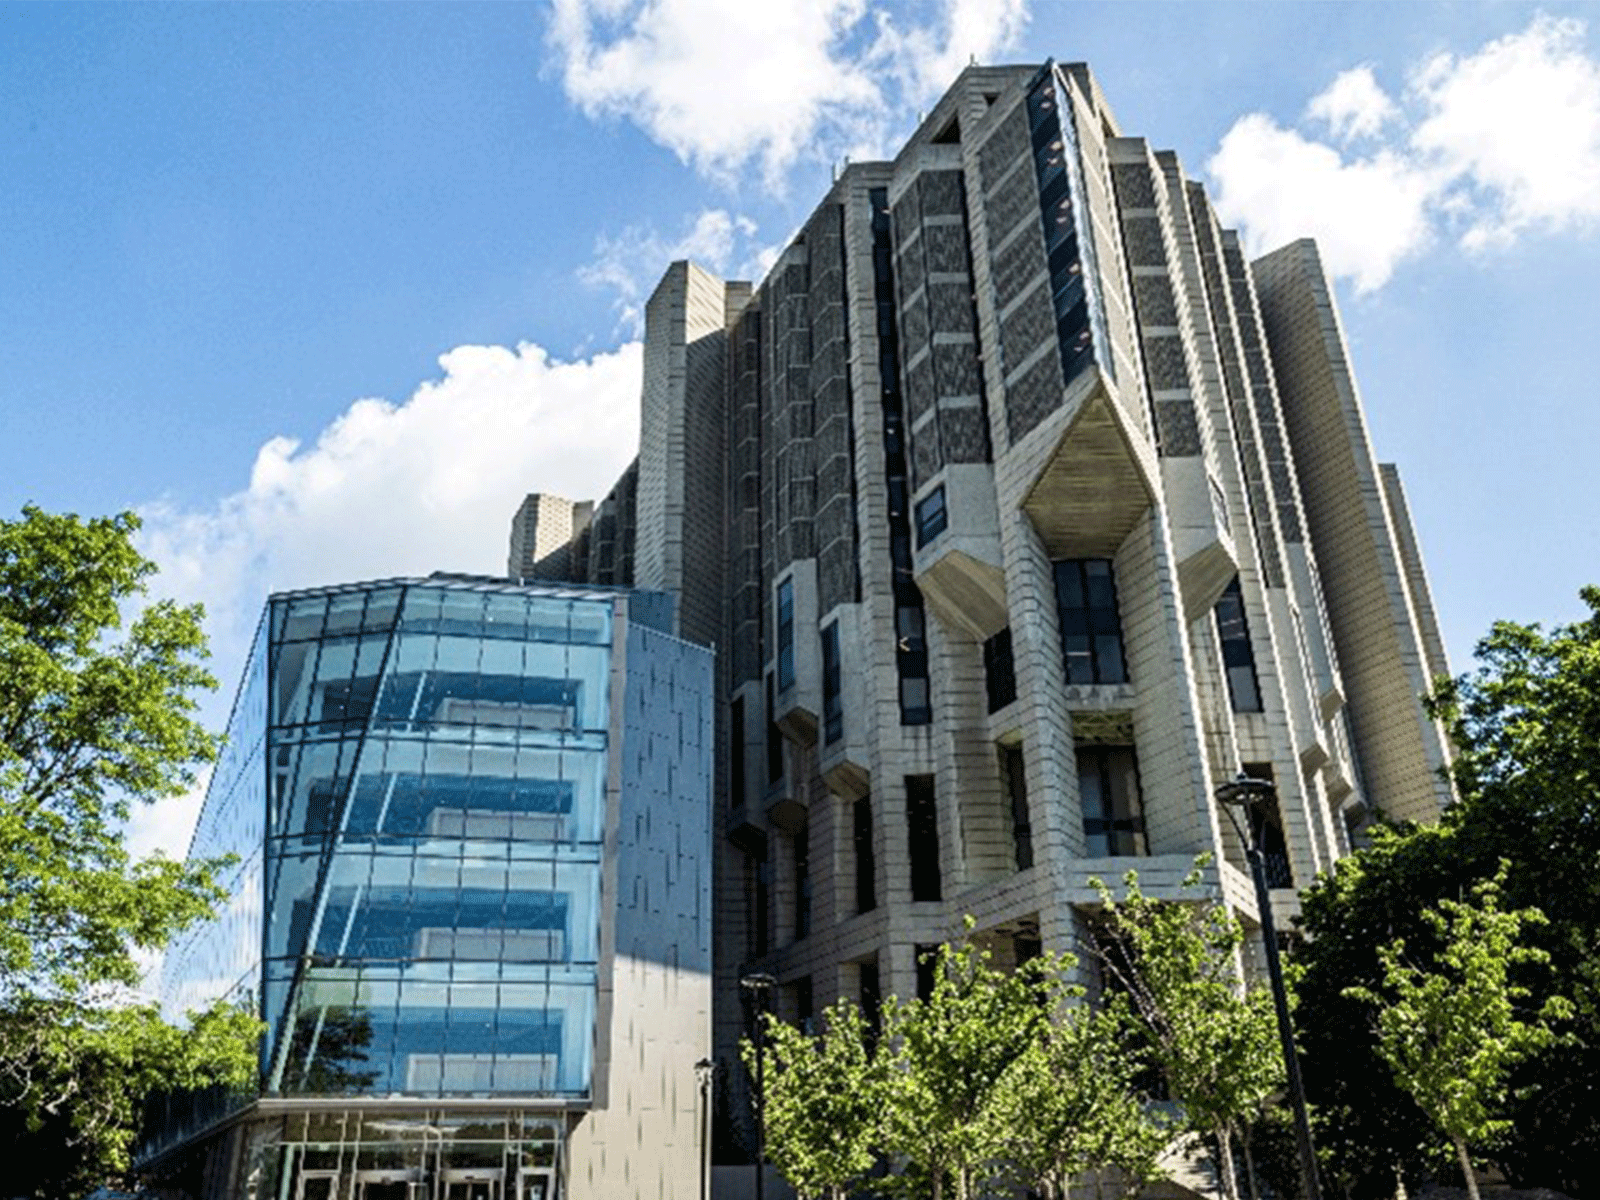 Picture of south side of Robarts Library and Commons looking north from Harbord Street.